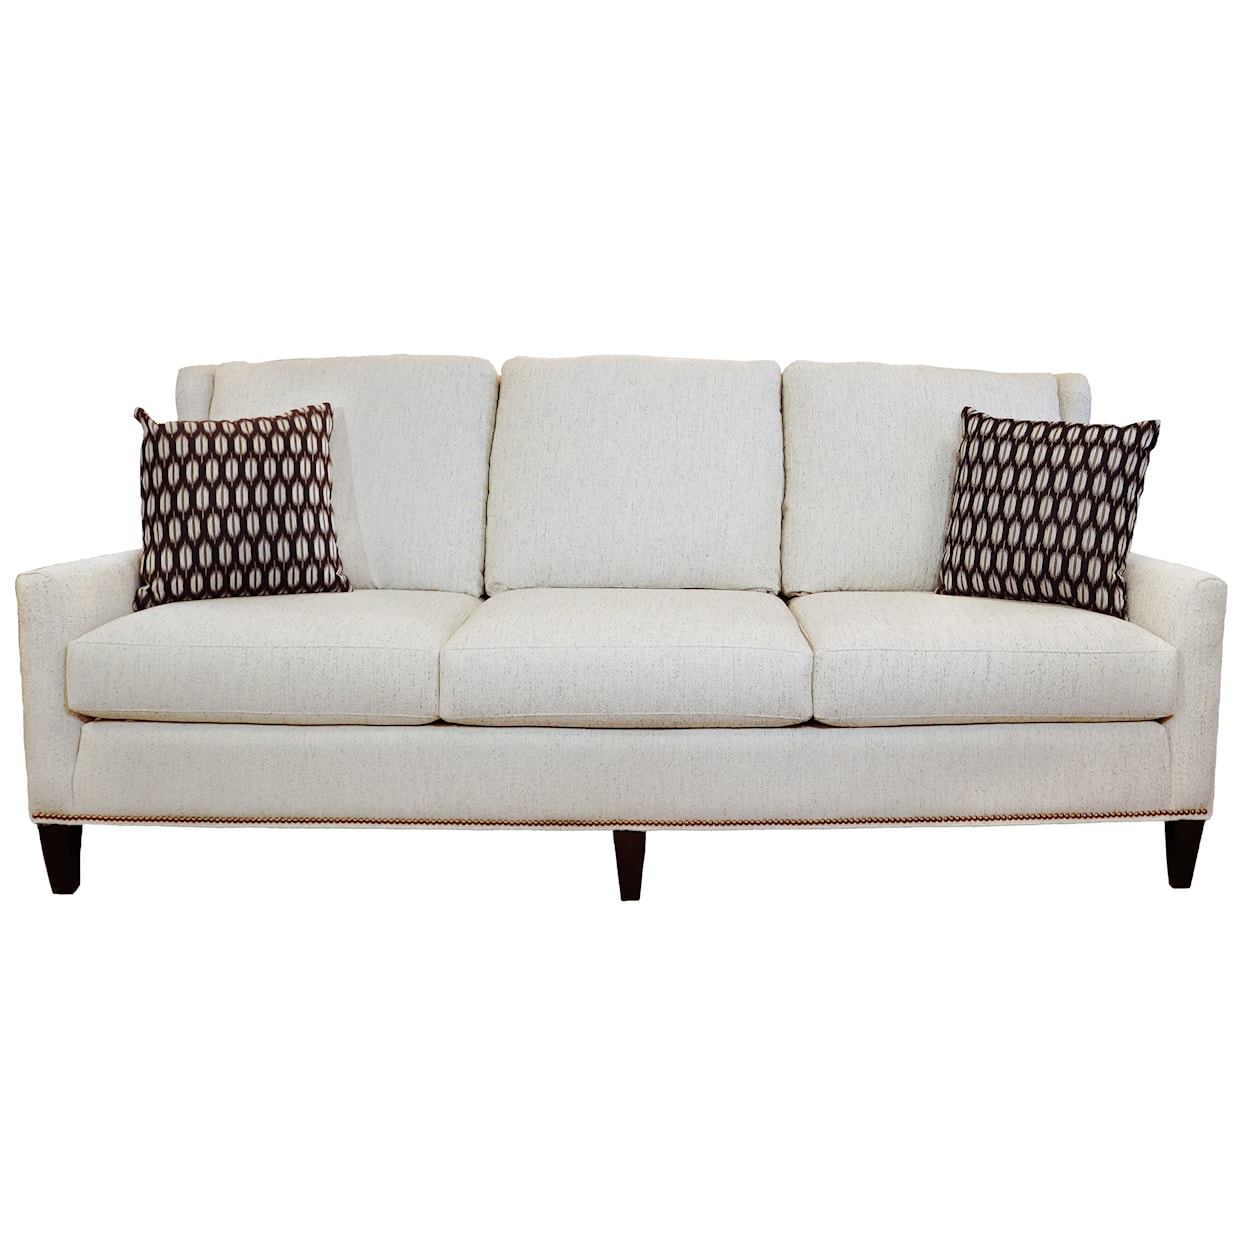 Smith Brothers 270 Sofa with Nail-Head Trim